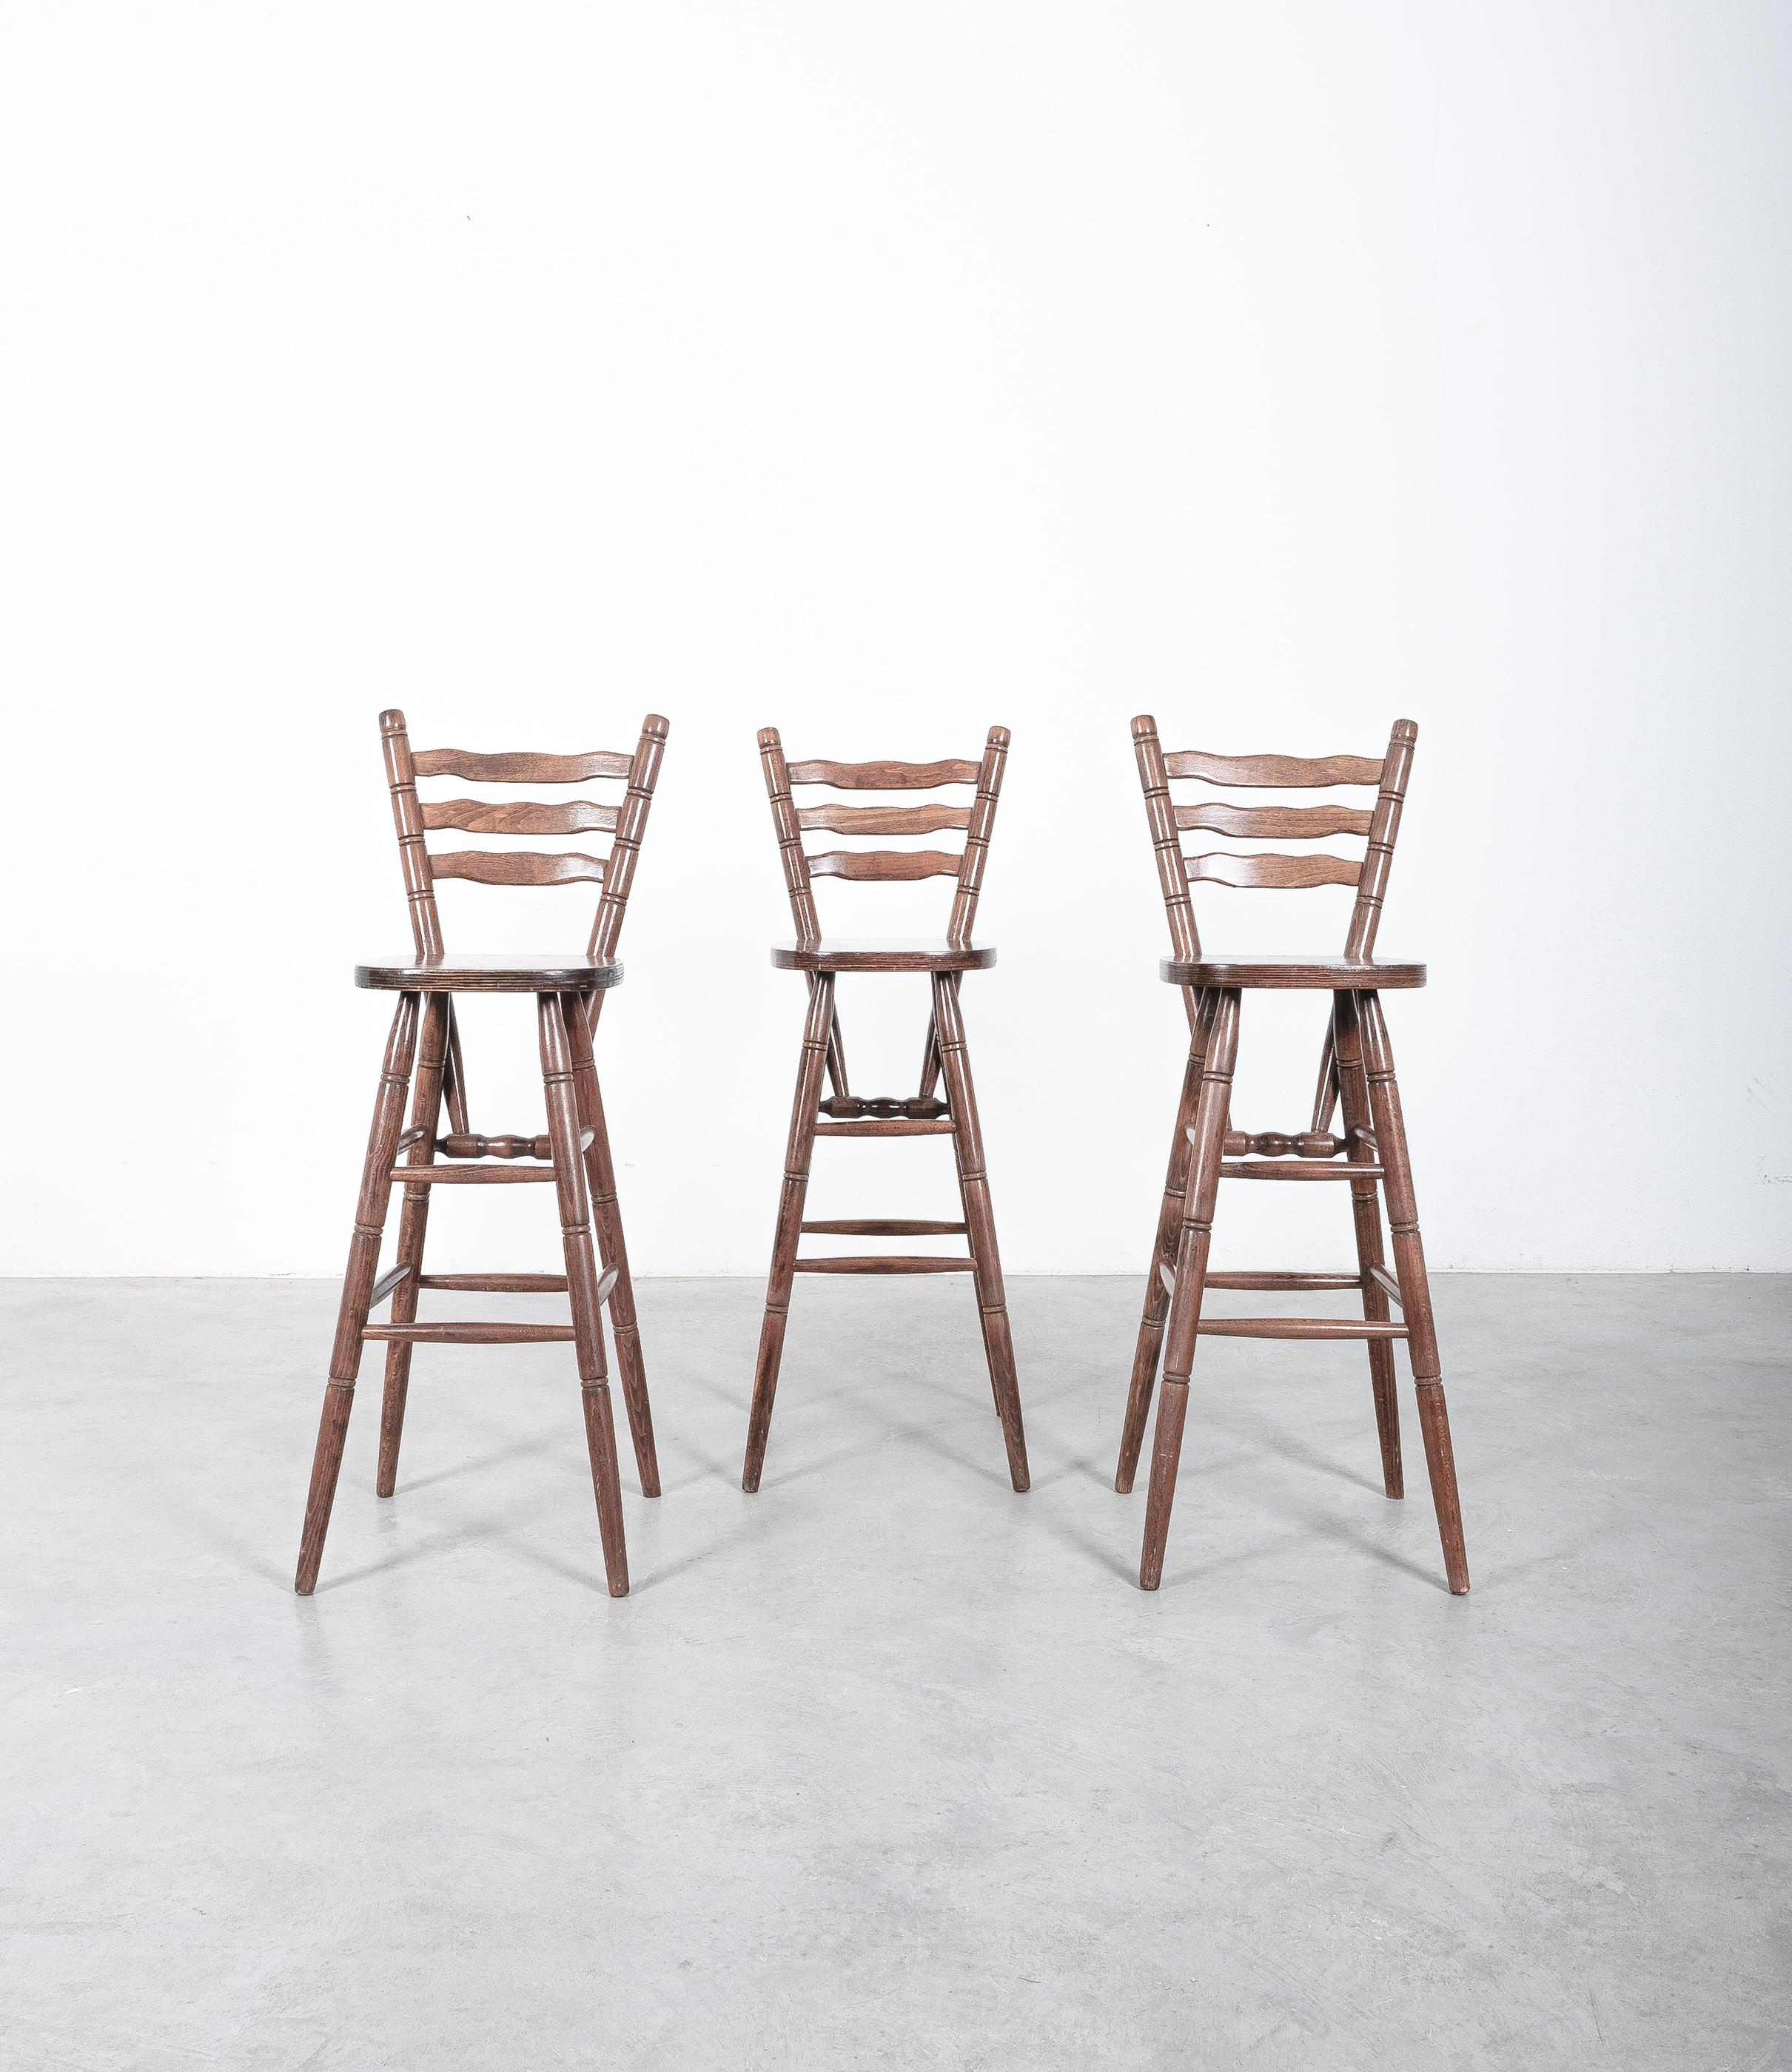 Rustic Bar Stools Midcentury from Birch Wood, Germany, 1970 For Sale 7